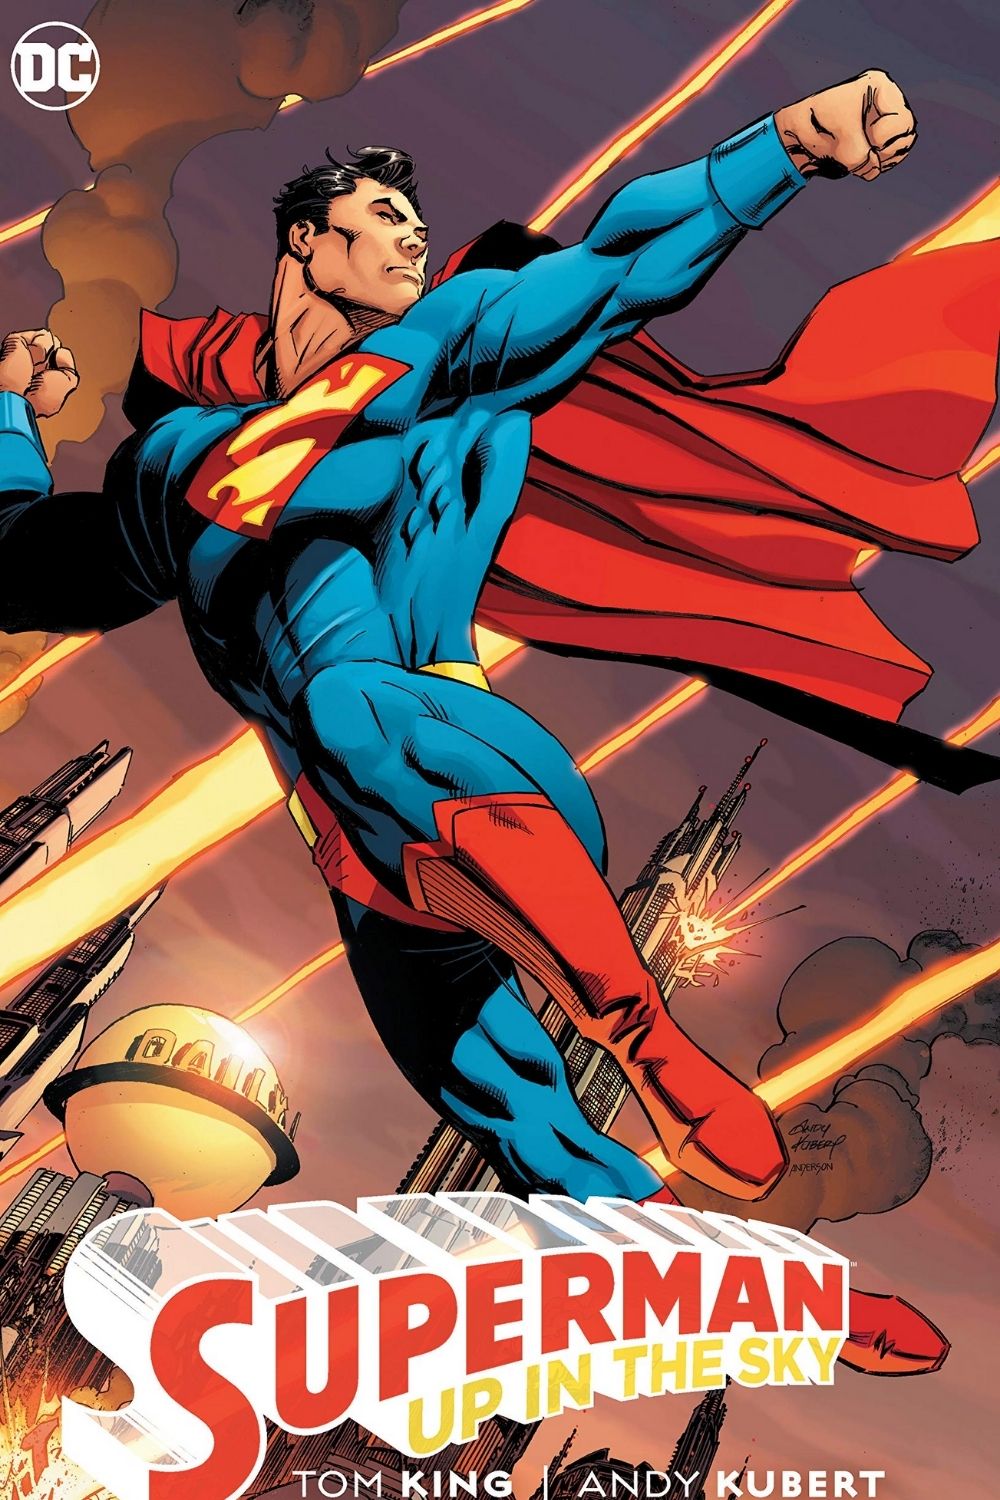 10 Strongest Characters From DC Comics (Superman)